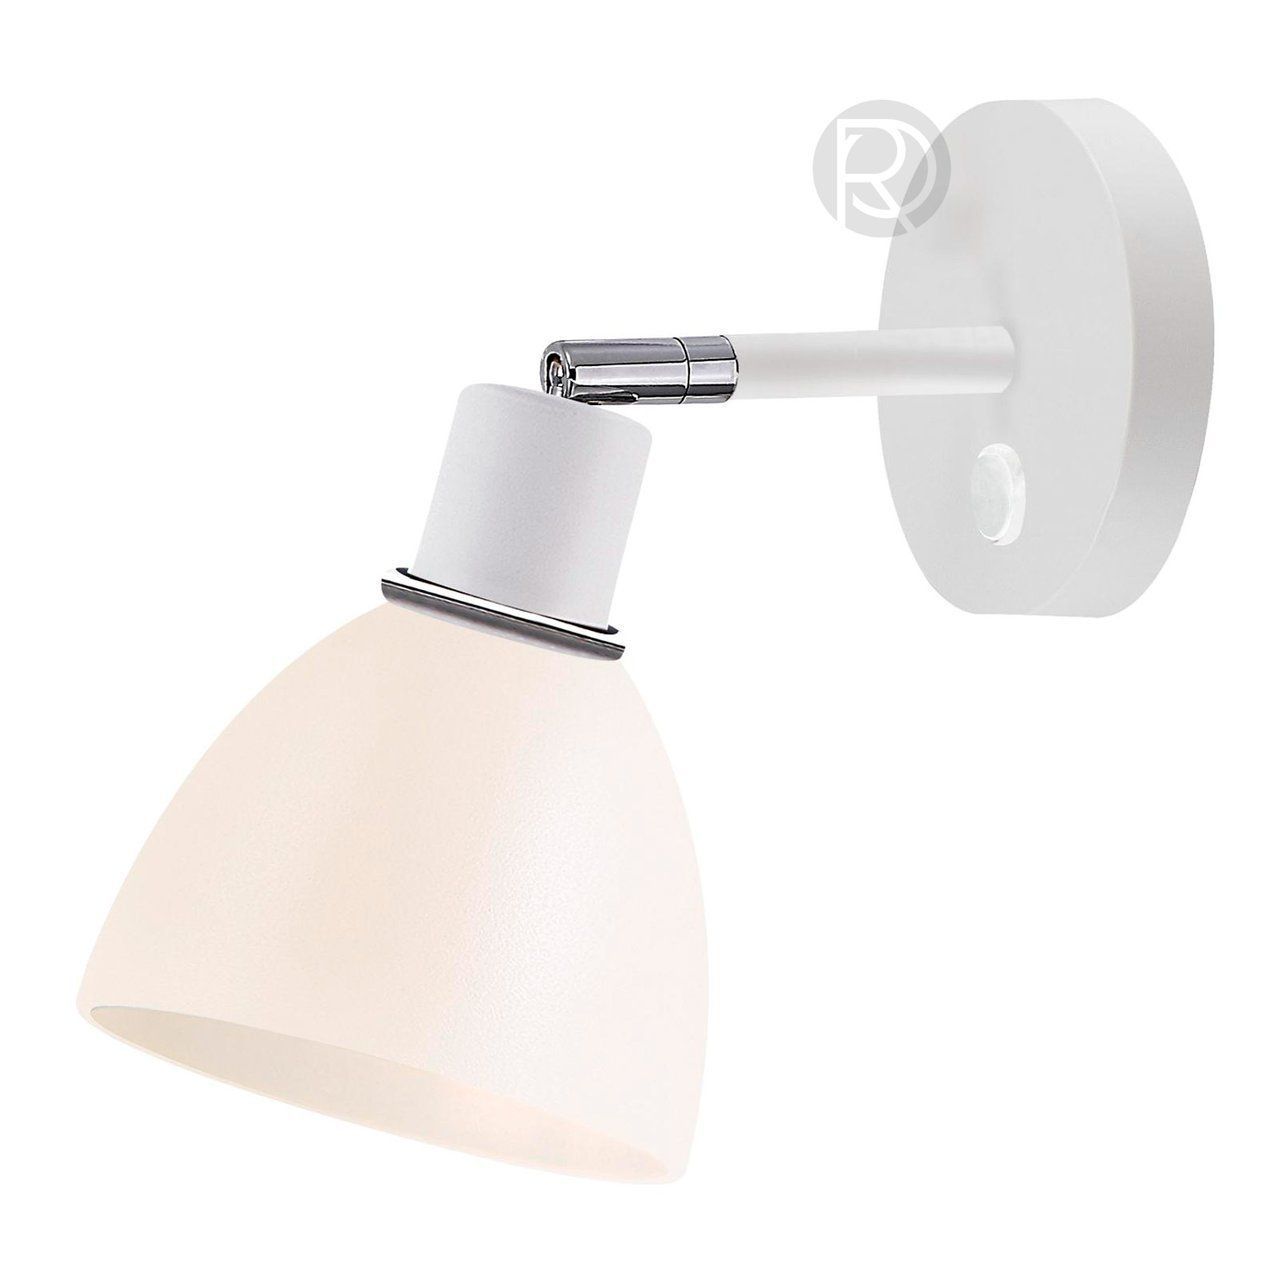 Wall lamp (Sconce) RAY NORD by Romatti